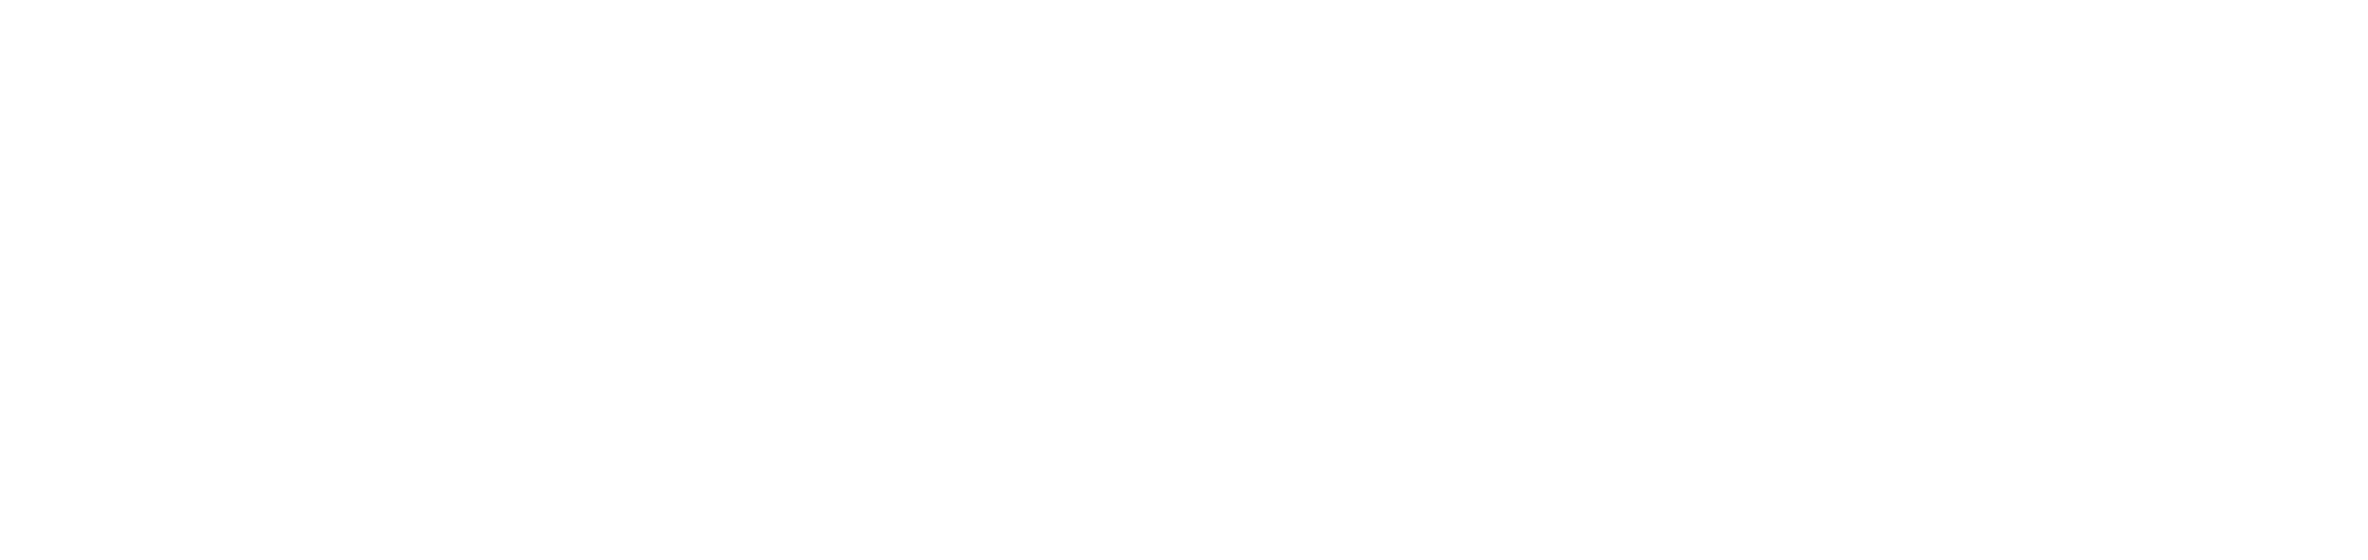 MVP, user test, beta test, and launch